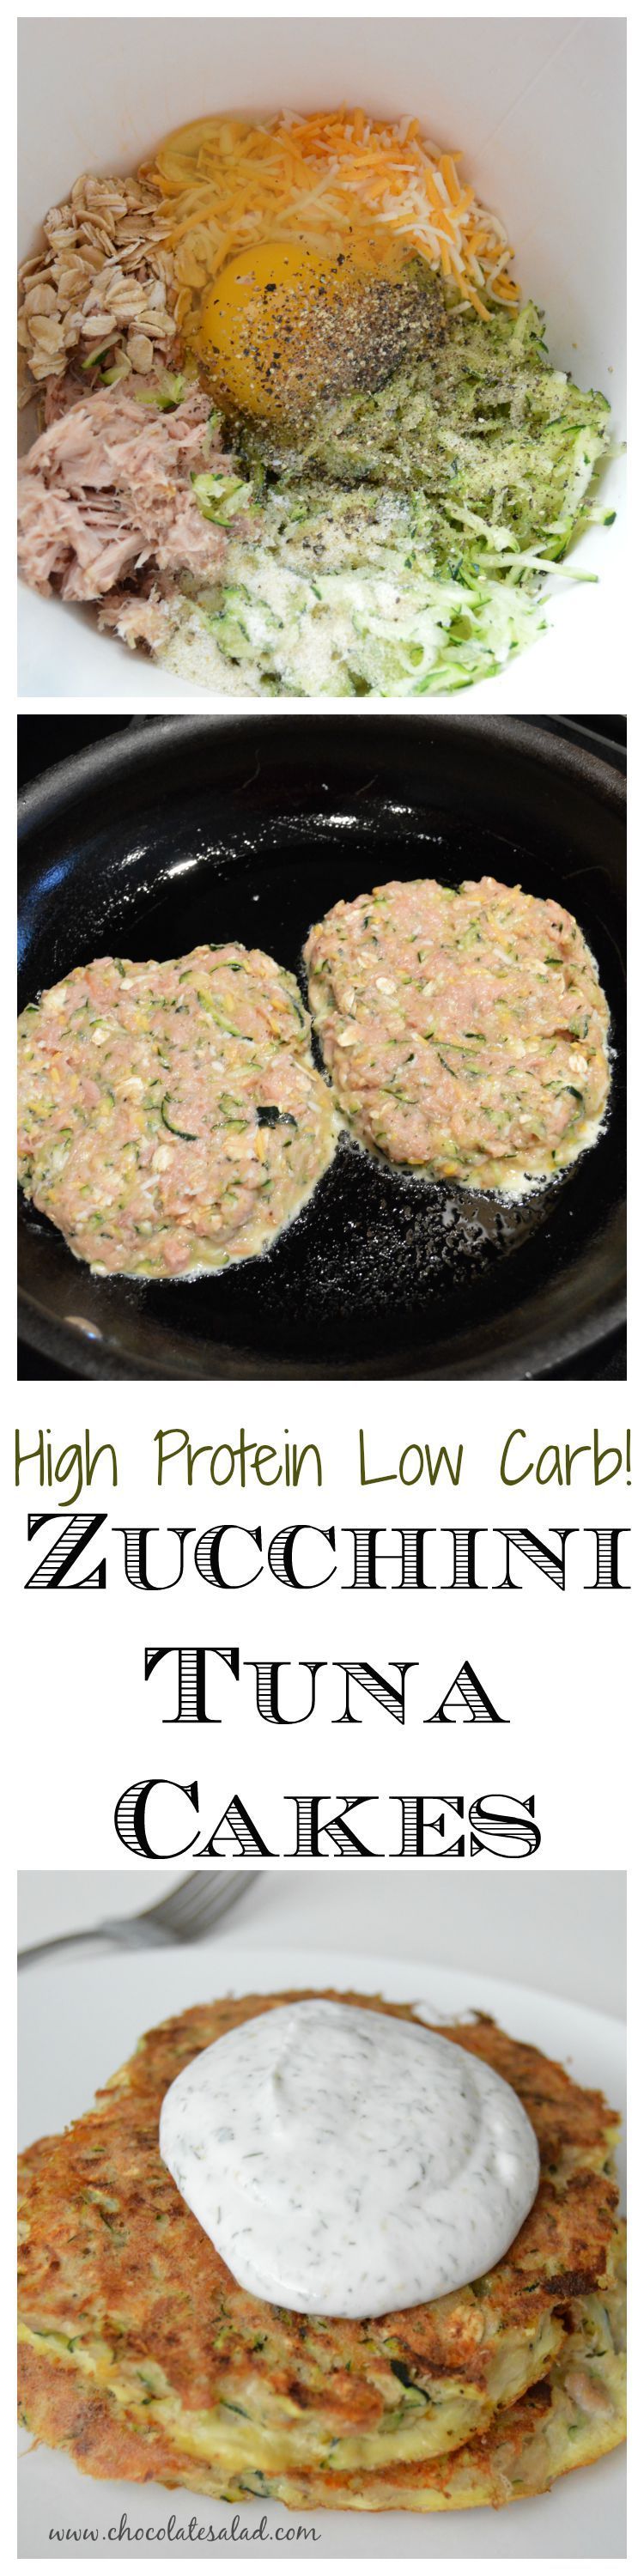 Easy meal or snack for zuuchini season. Only 280 calories and 34 g protein! Zucchini Tuna Cakes on chocolatesalad.com